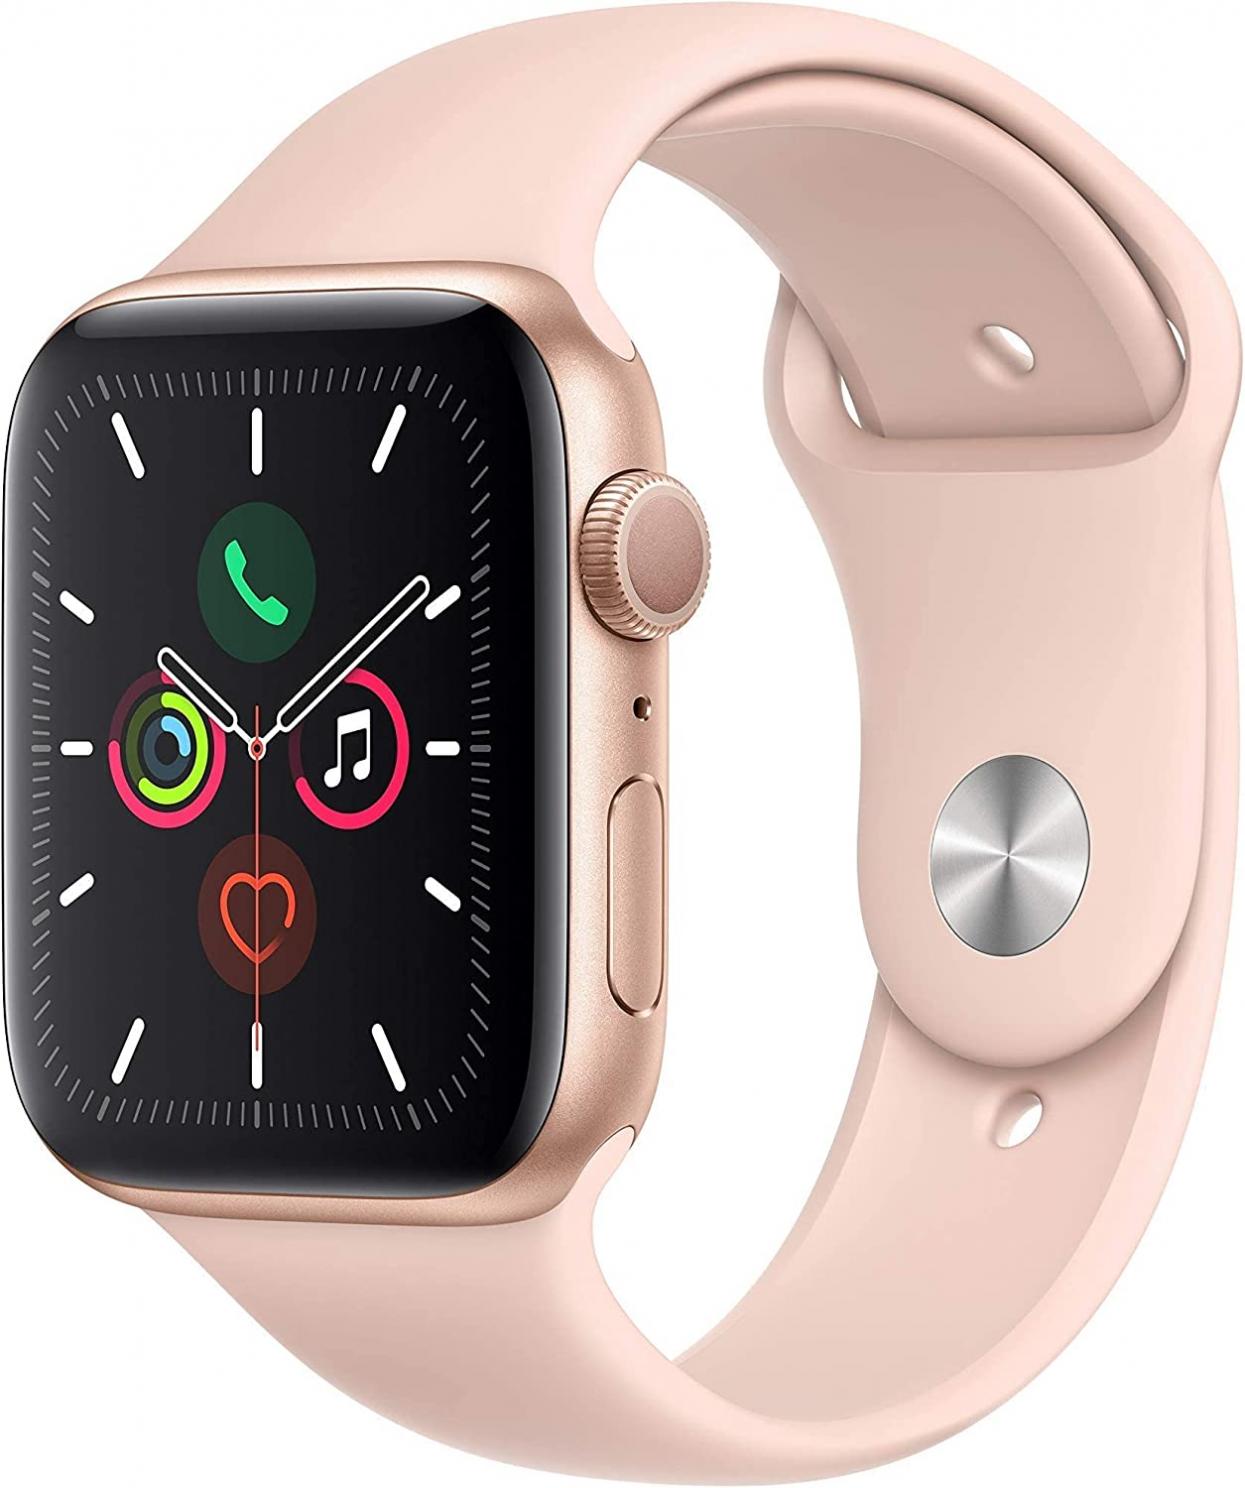 Apple Watch Series 5 (GPS, 40MM) - Gold Aluminum Case with Pink Sand Sport Band (Renewed)